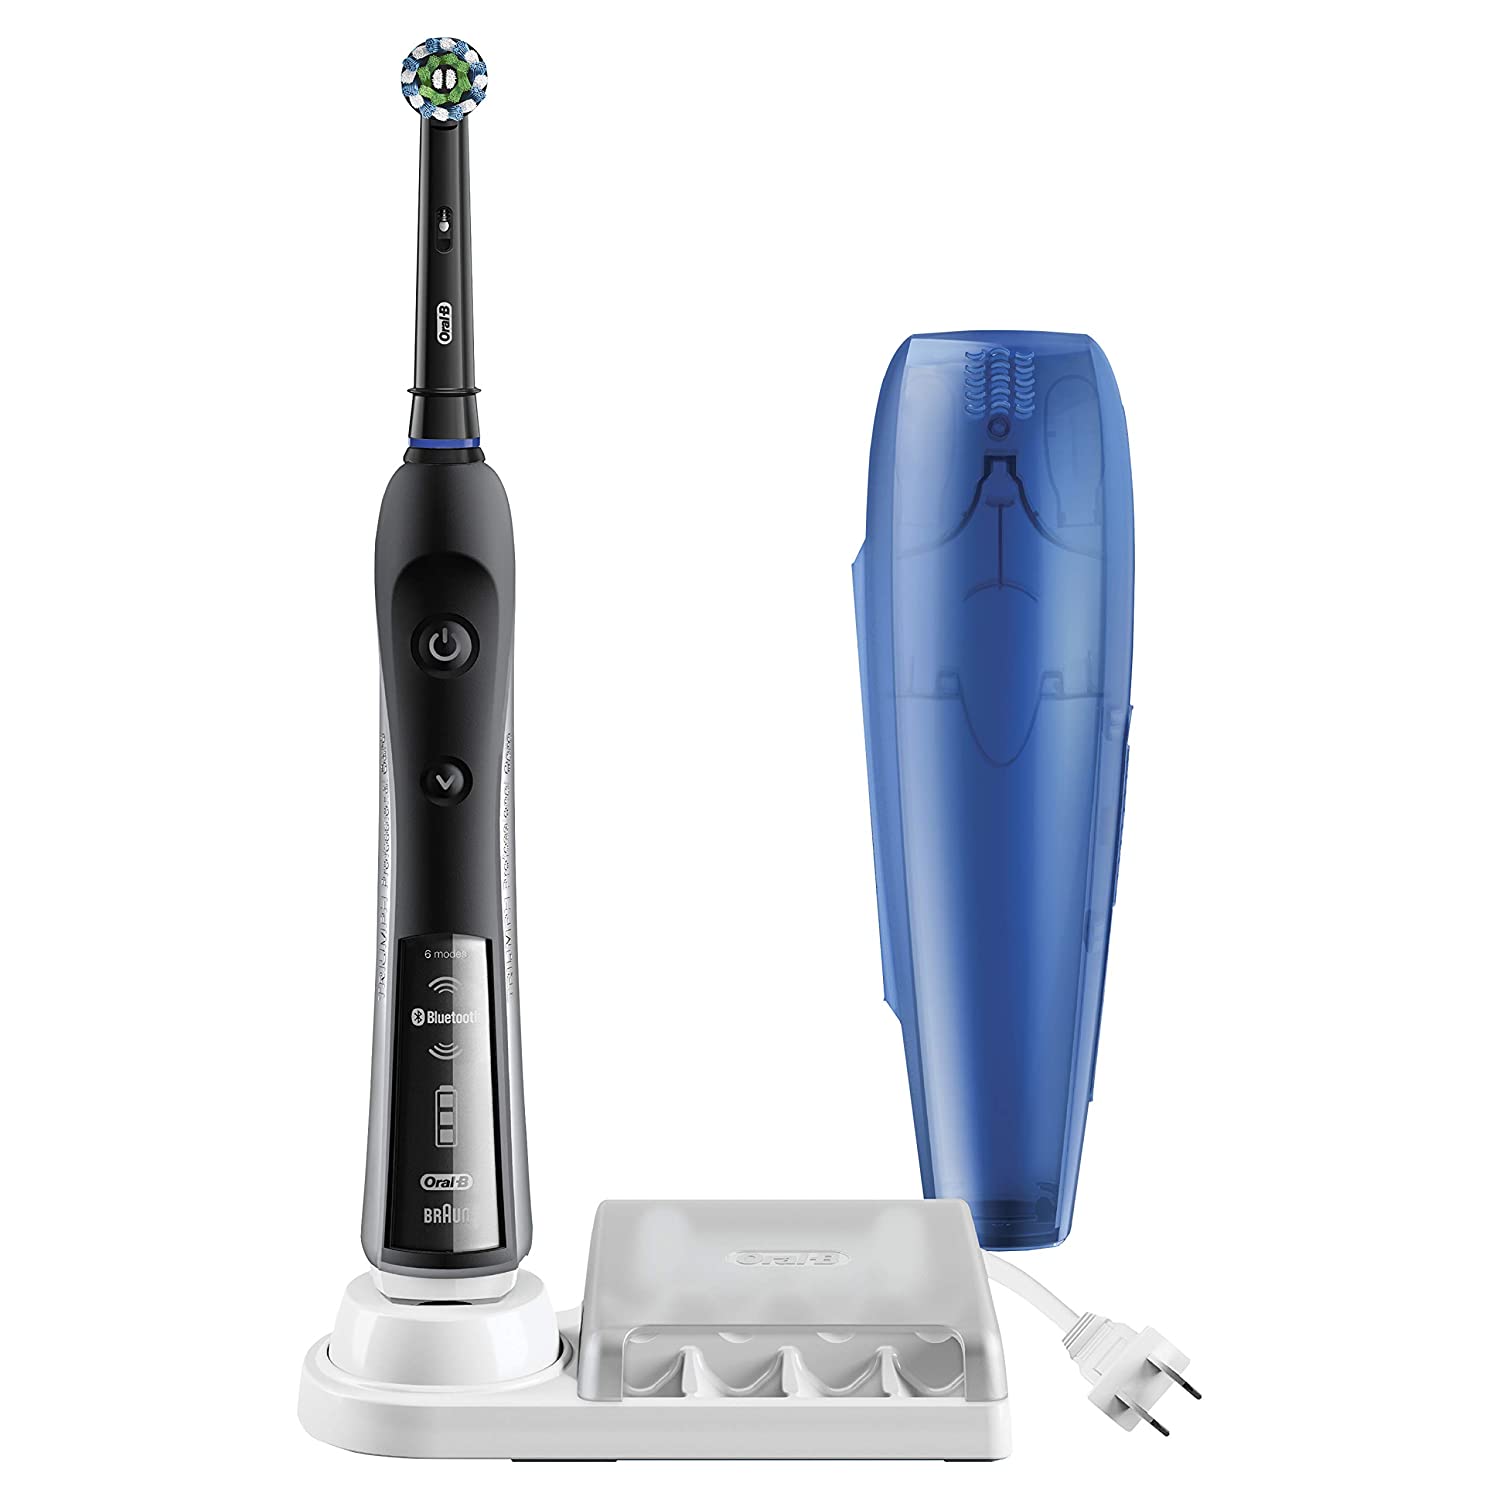 Oral-B 5000 SmartSeries Electric Toothbrush White Powered by Braun